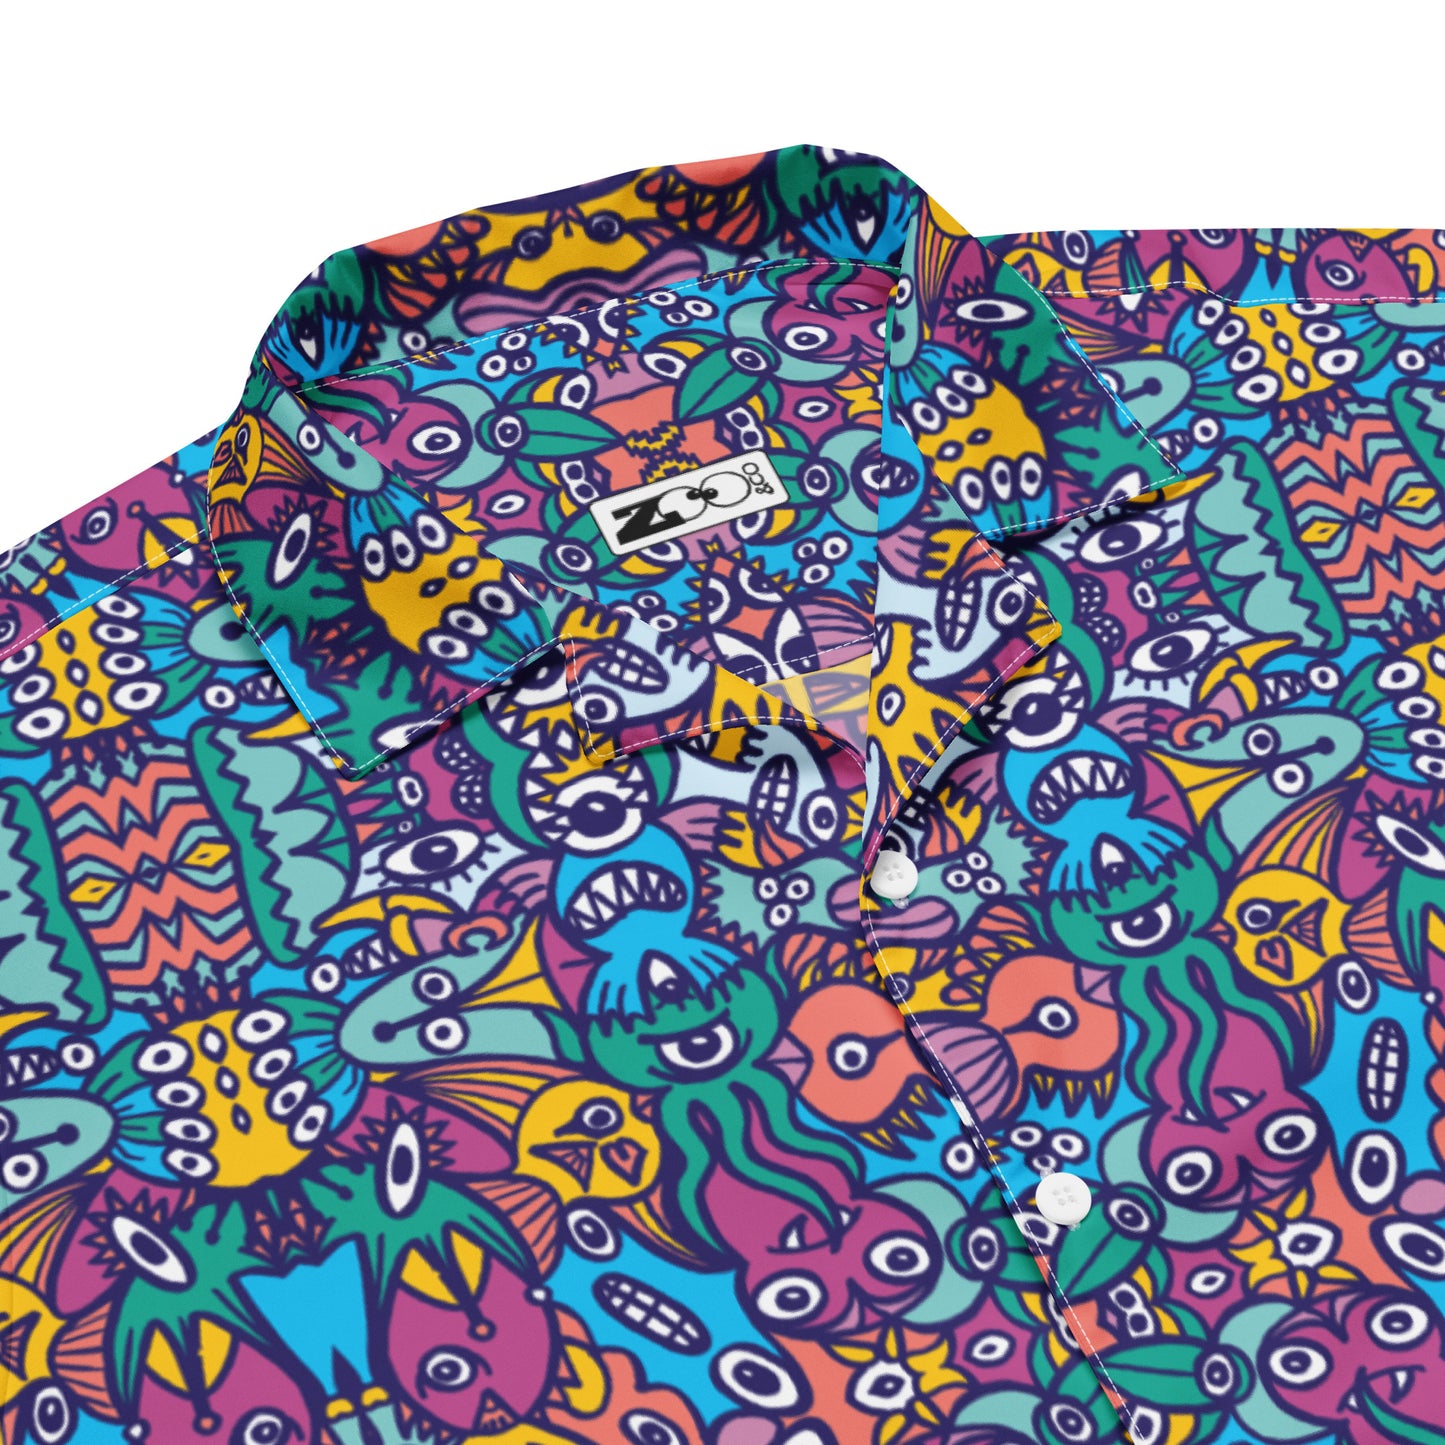 Whimsical design featuring multicolor critters from an alien world Unisex button shirt. Product details